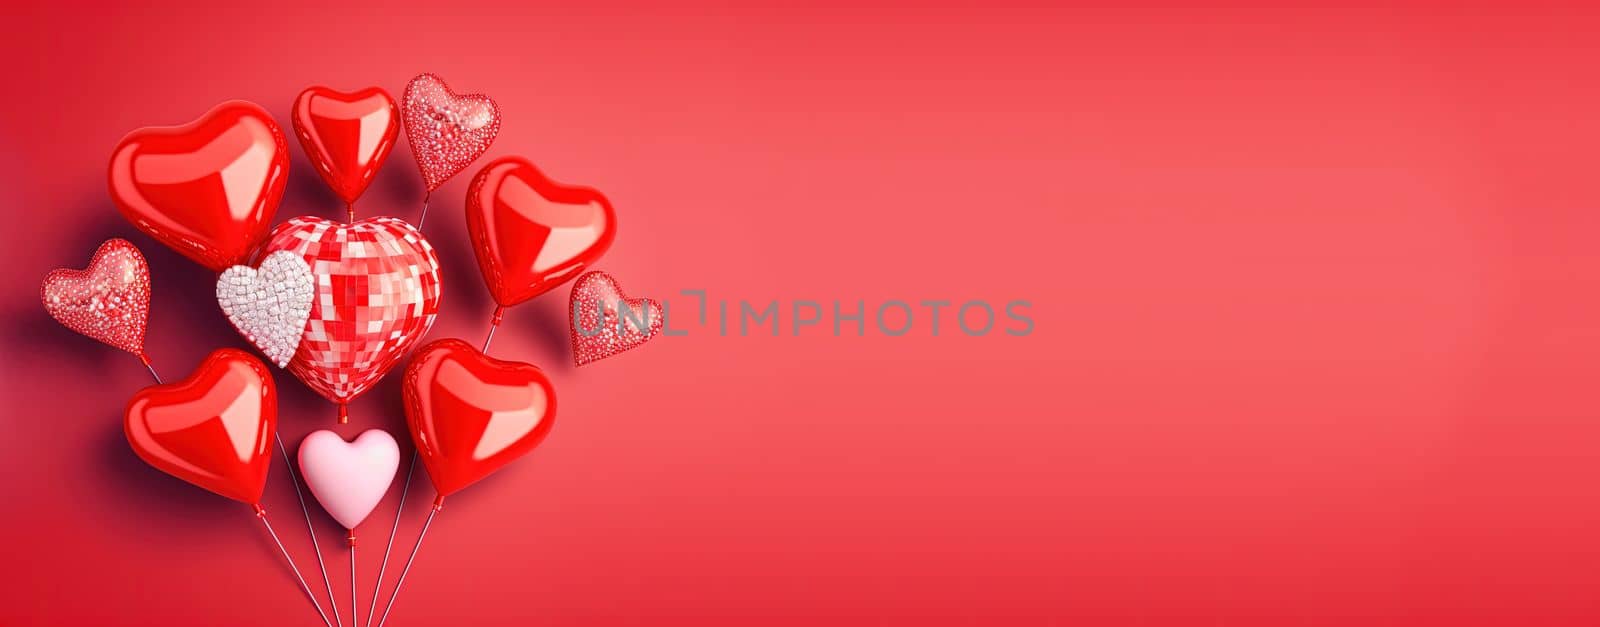 Valentine's Day illustration with a red 3D heart on a banner background by templator